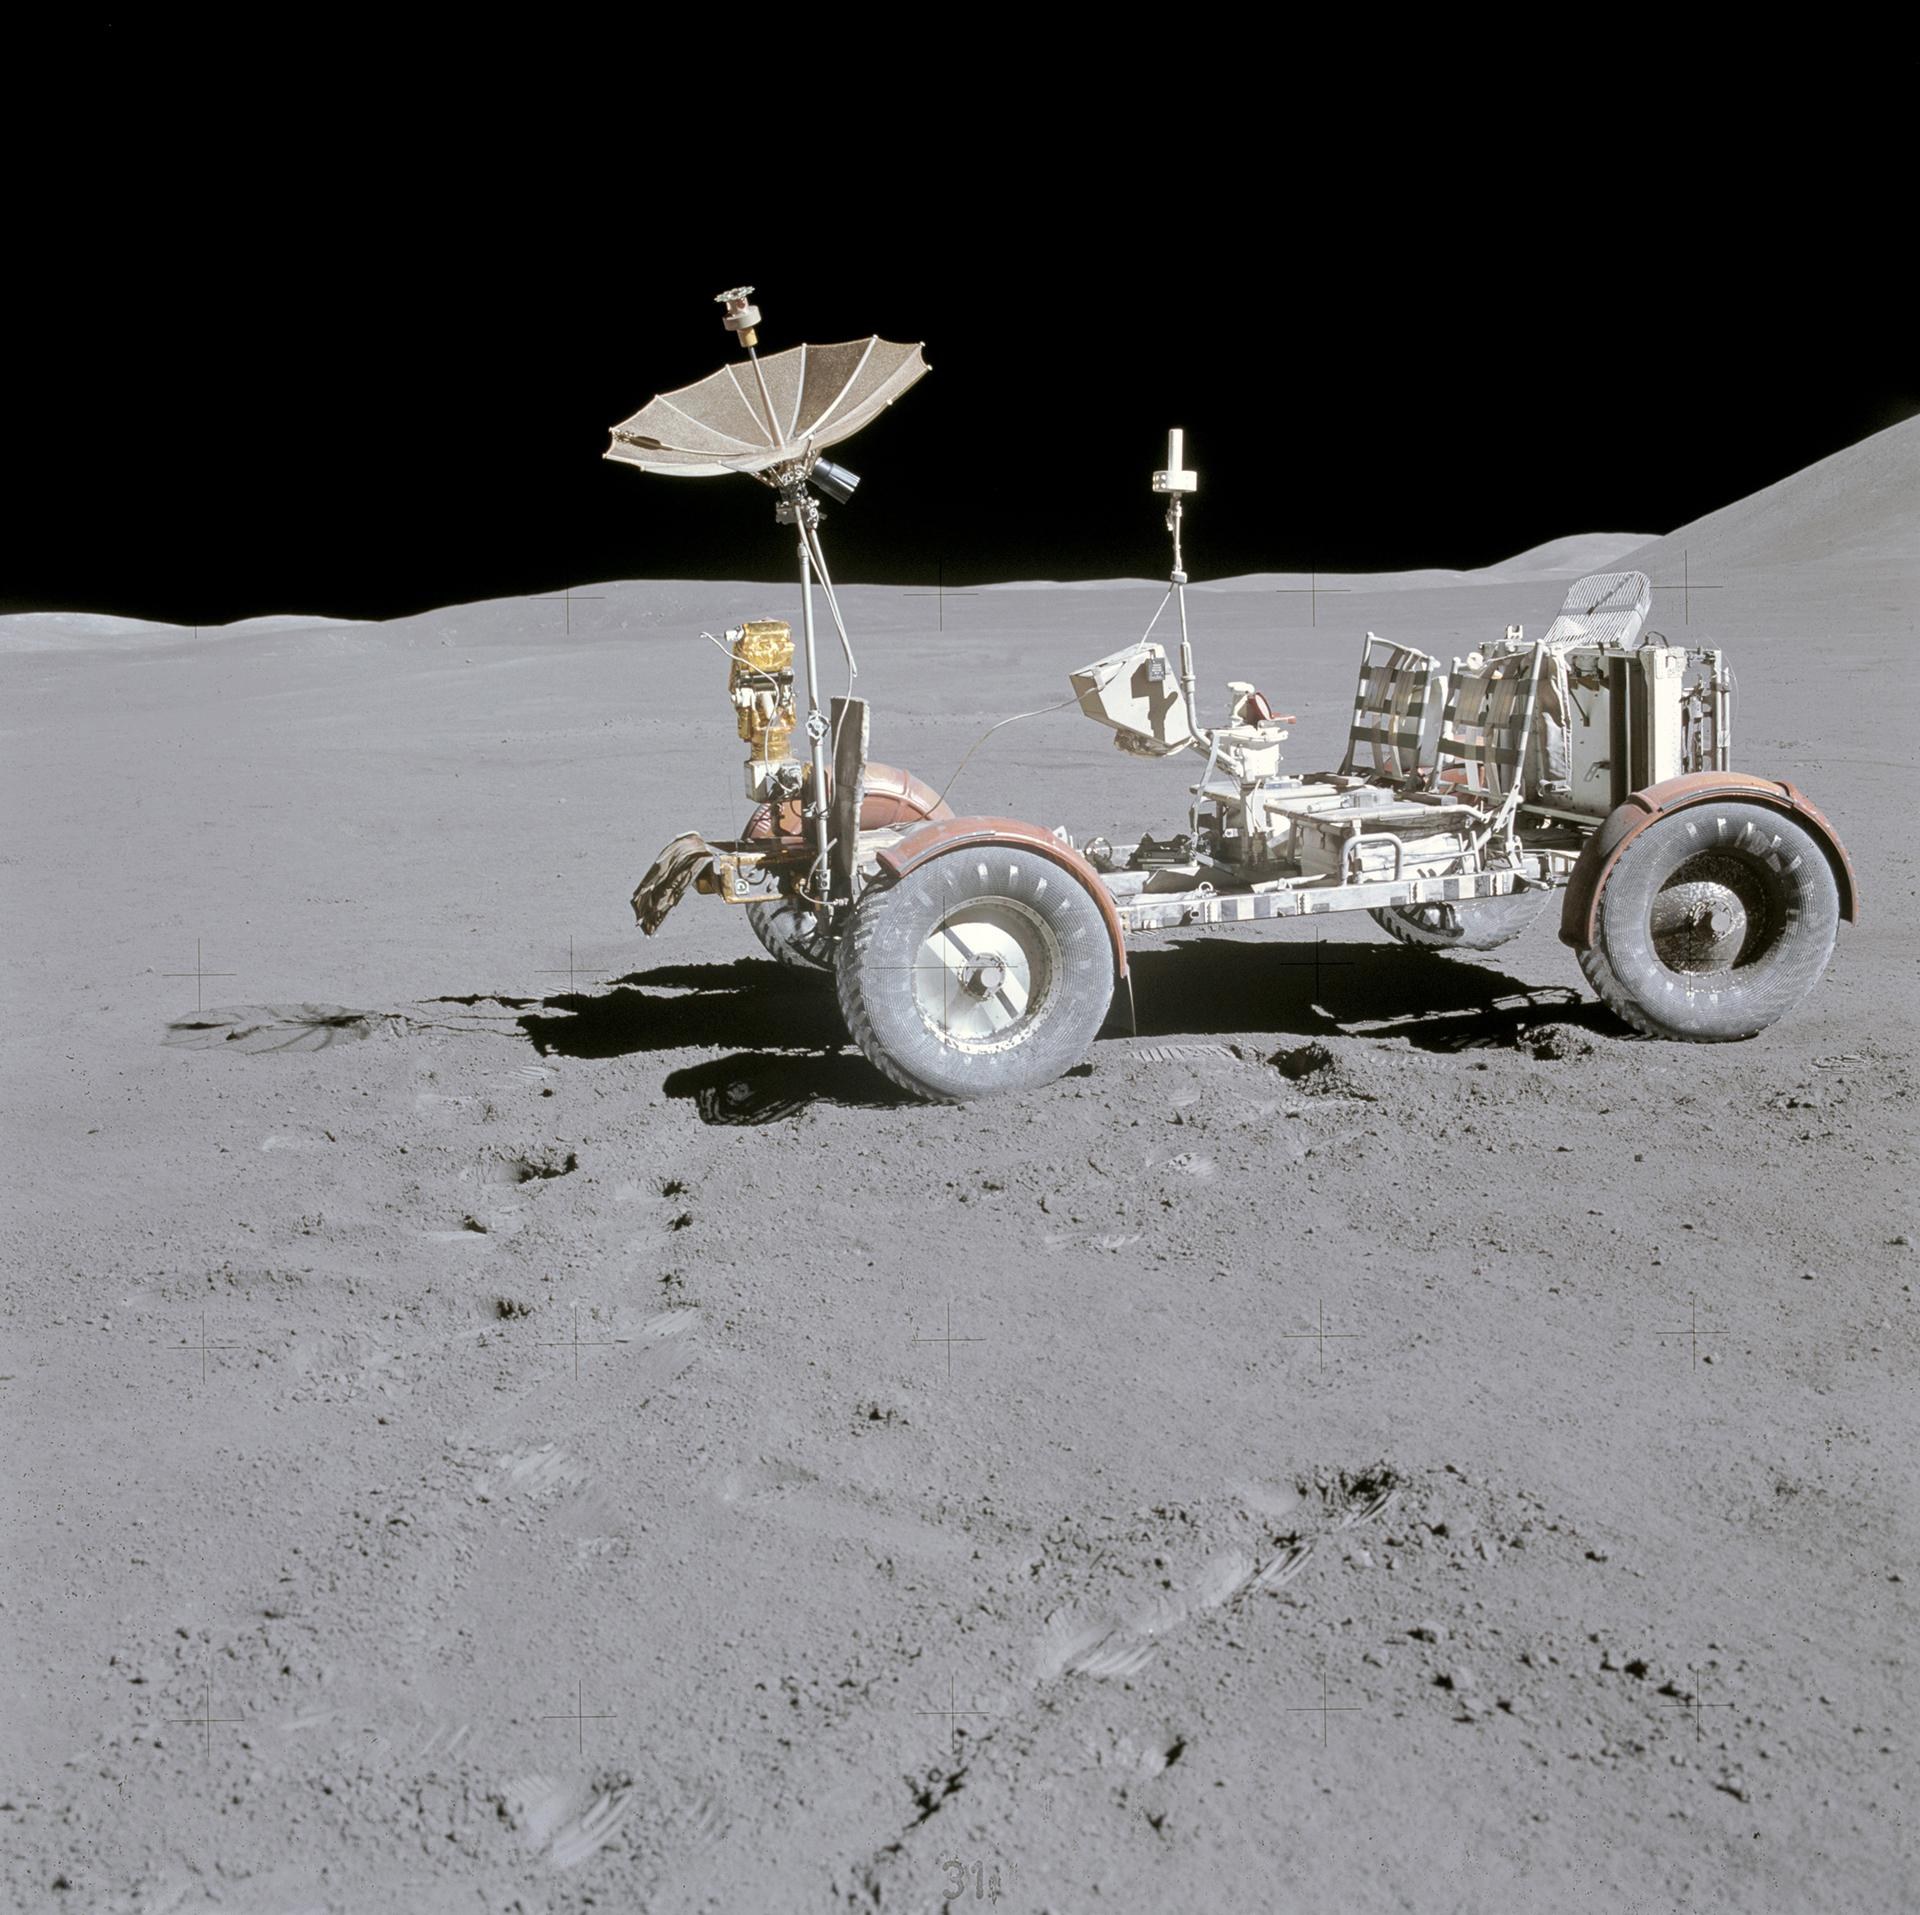 The lunar rover at the Hadley Apennine landing site